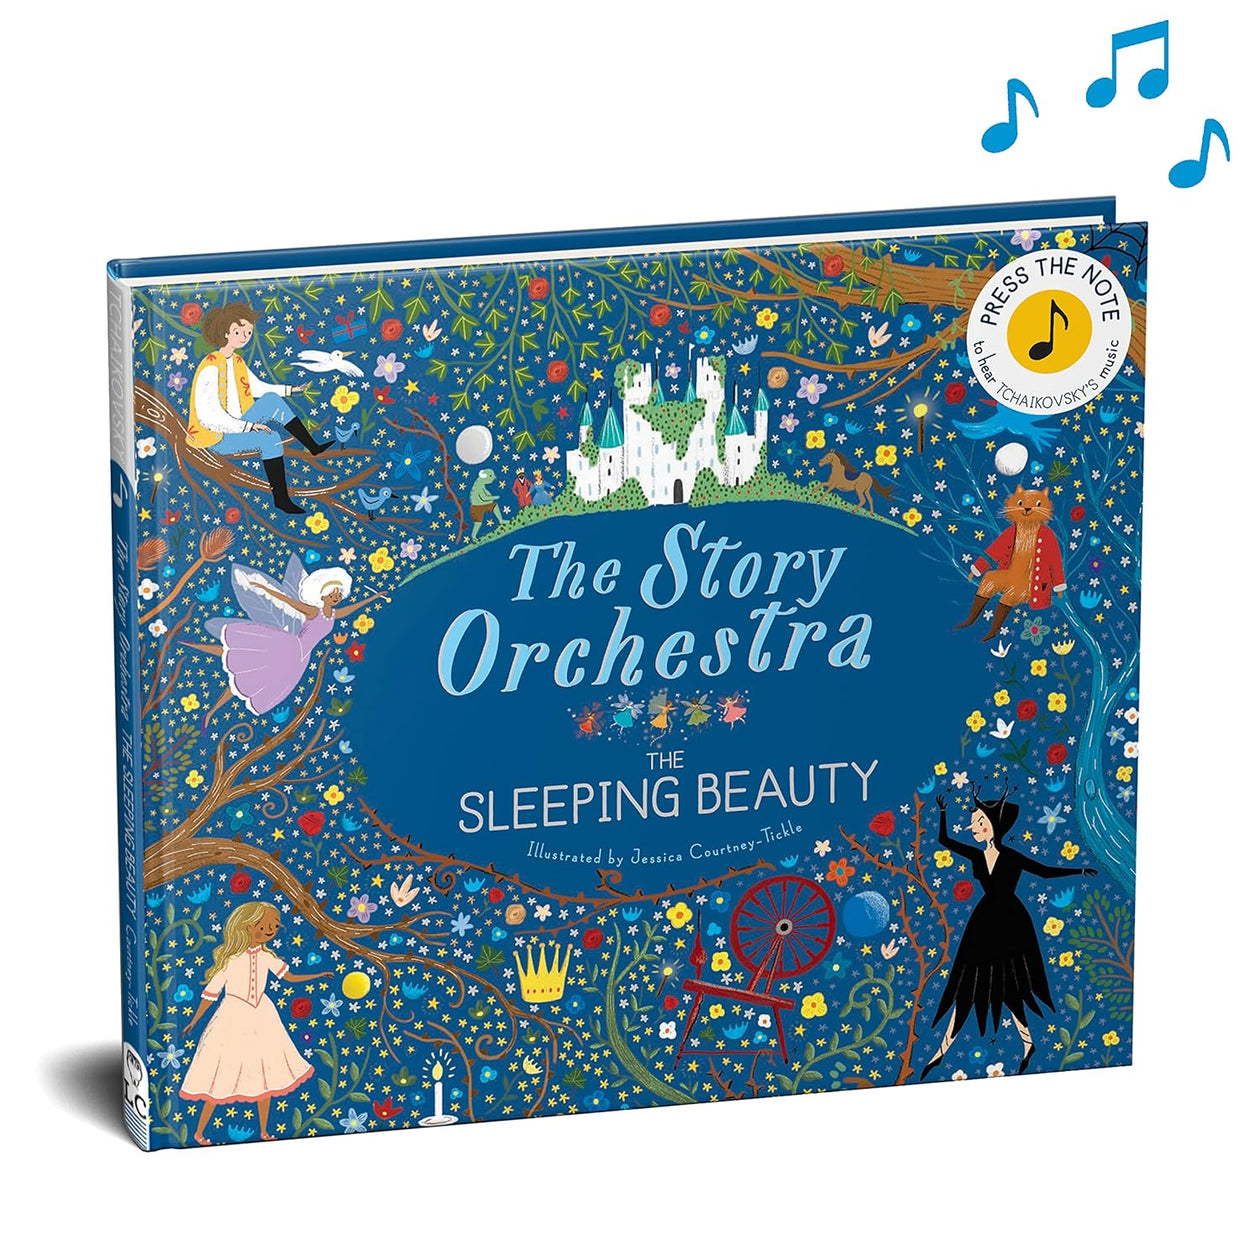 Katy Flint: The Sleeping Beauty, illustrated by Jessica Courtney-Tickle